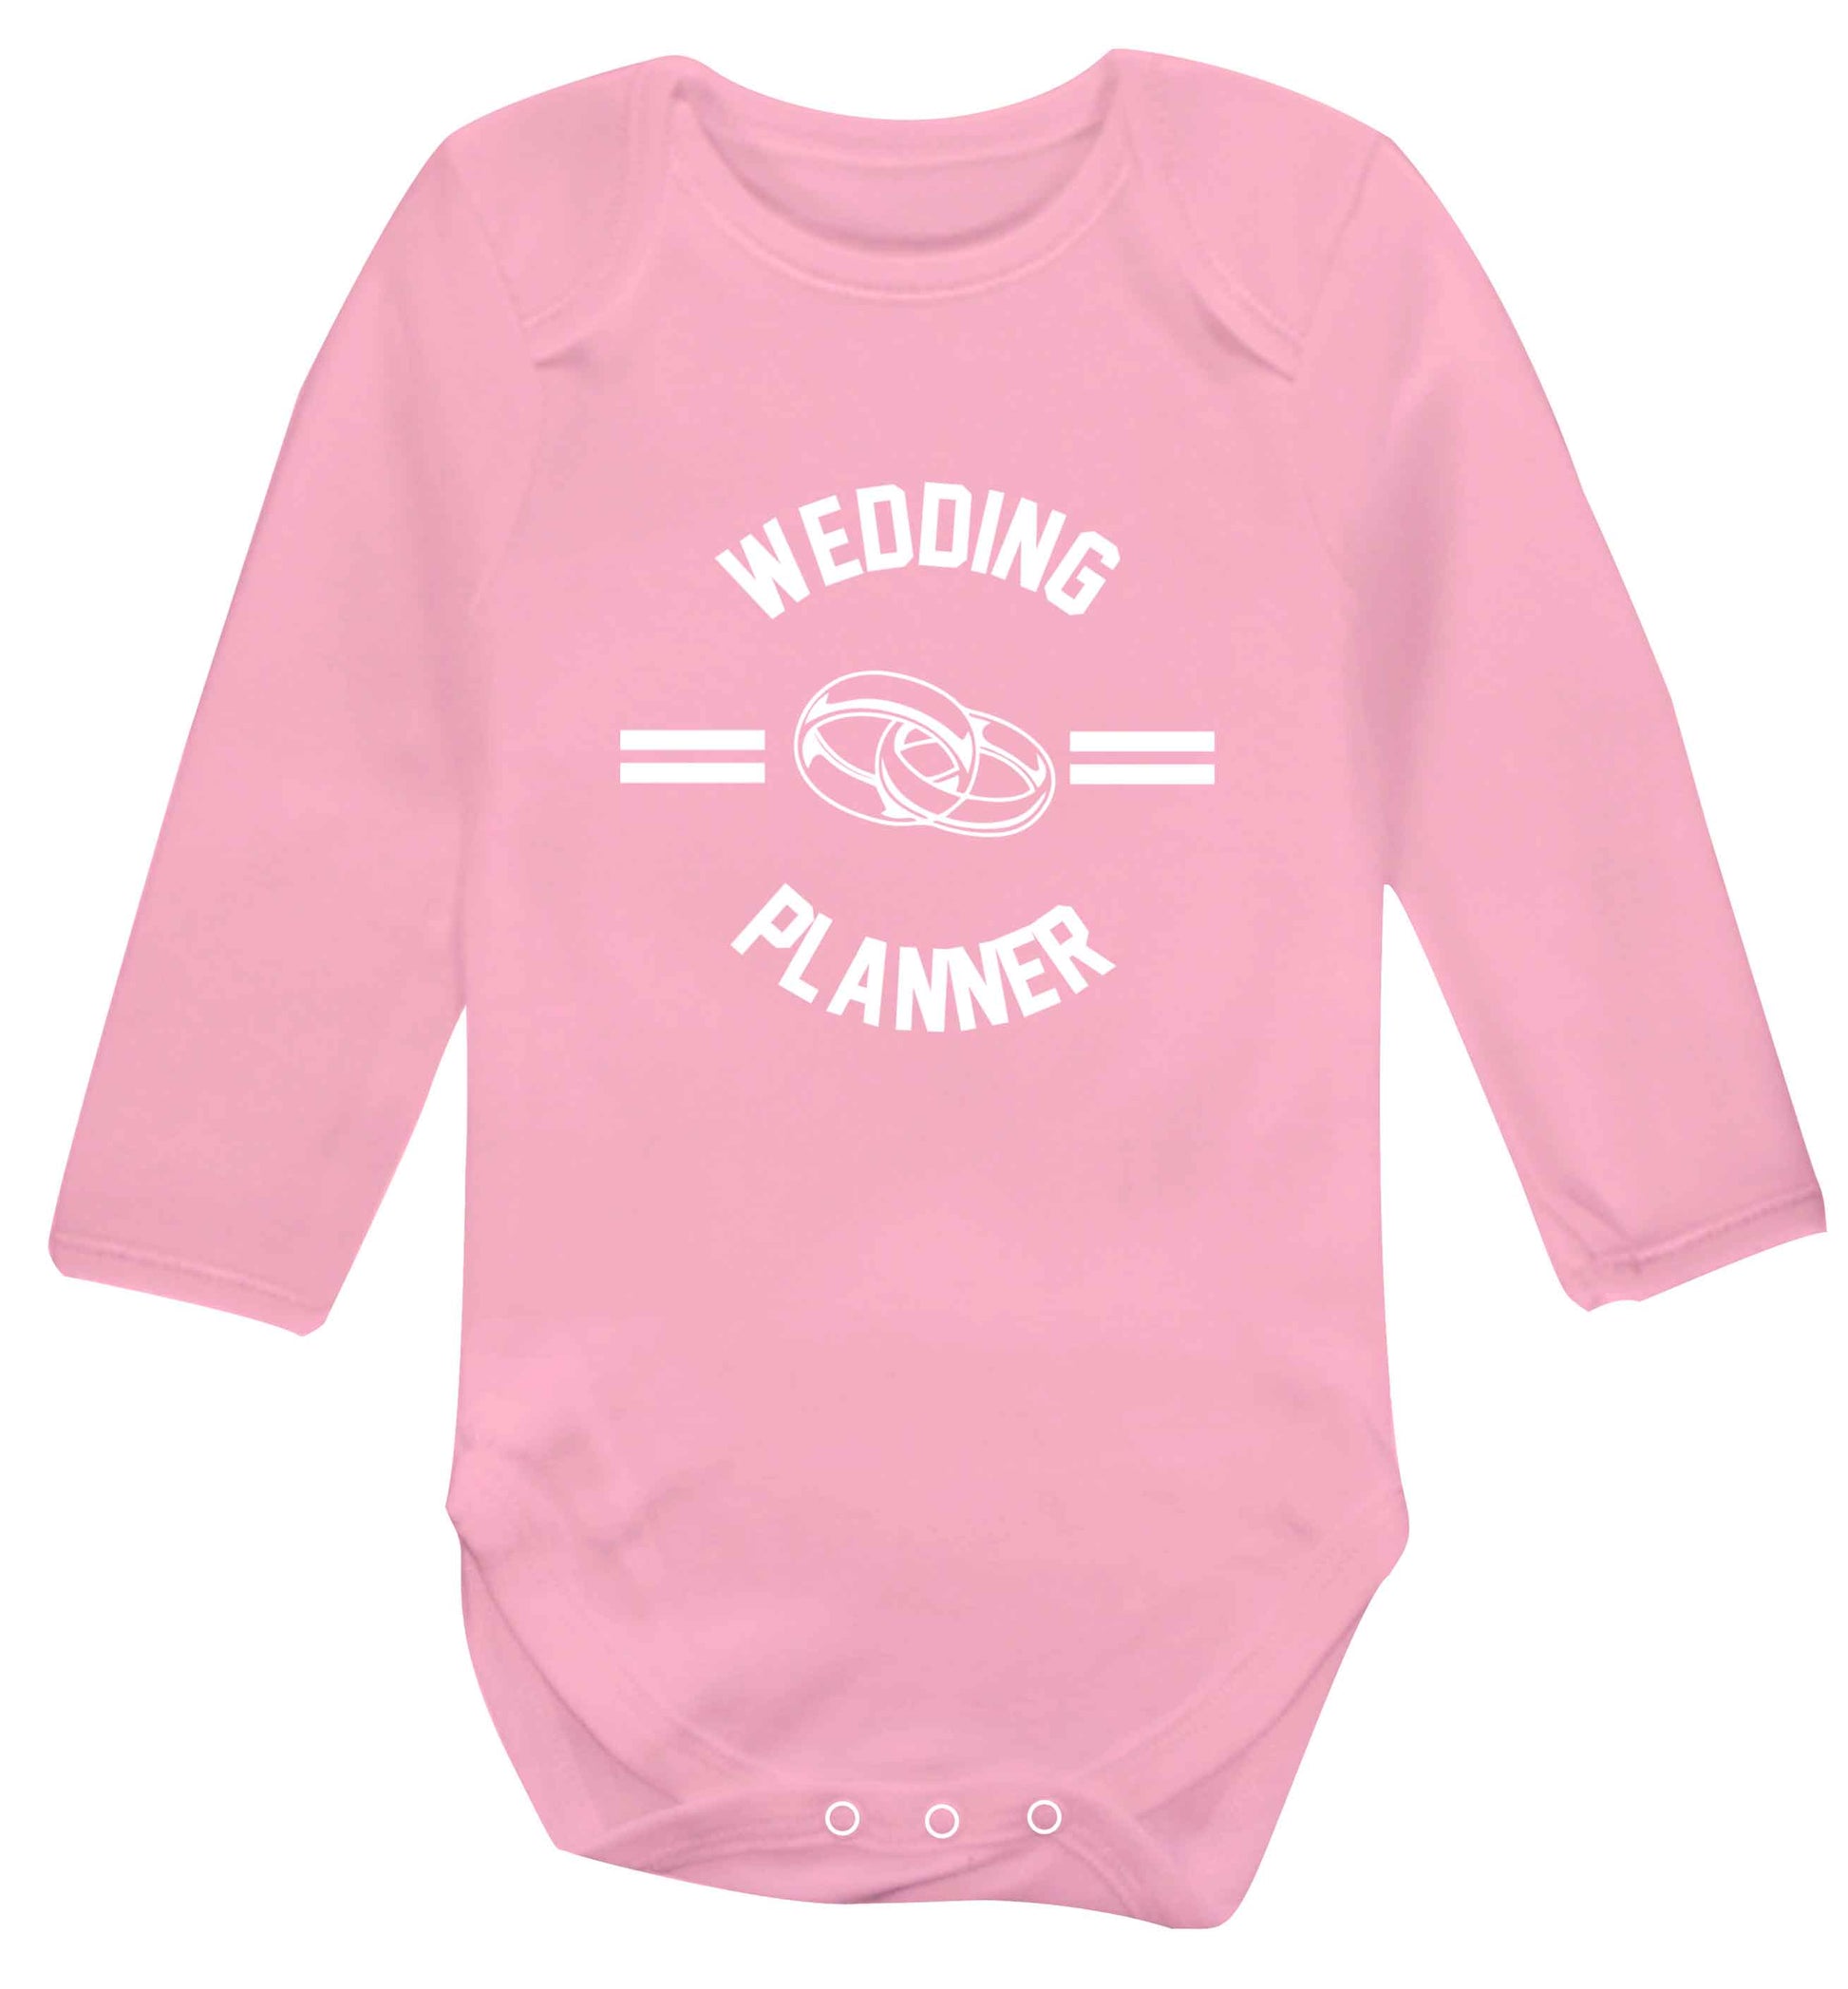 Wedding planner baby vest long sleeved pale pink 6-12 months